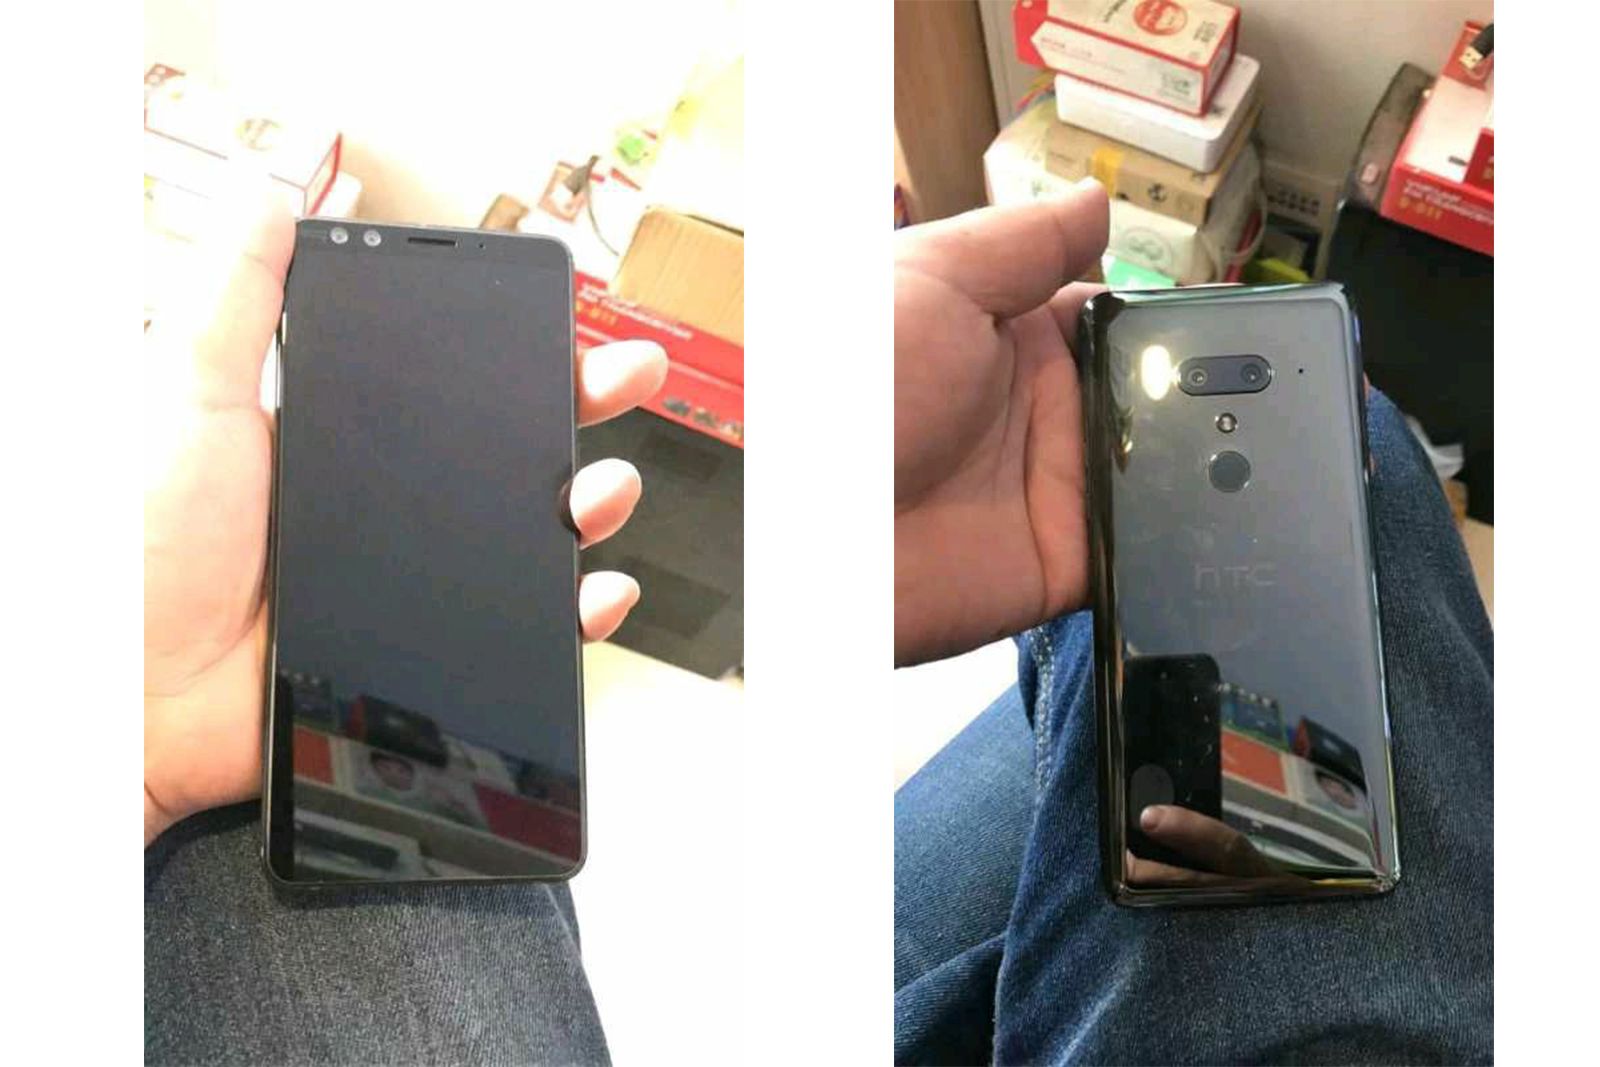 HTC U12 revealed in hands-on images without a notch image 1